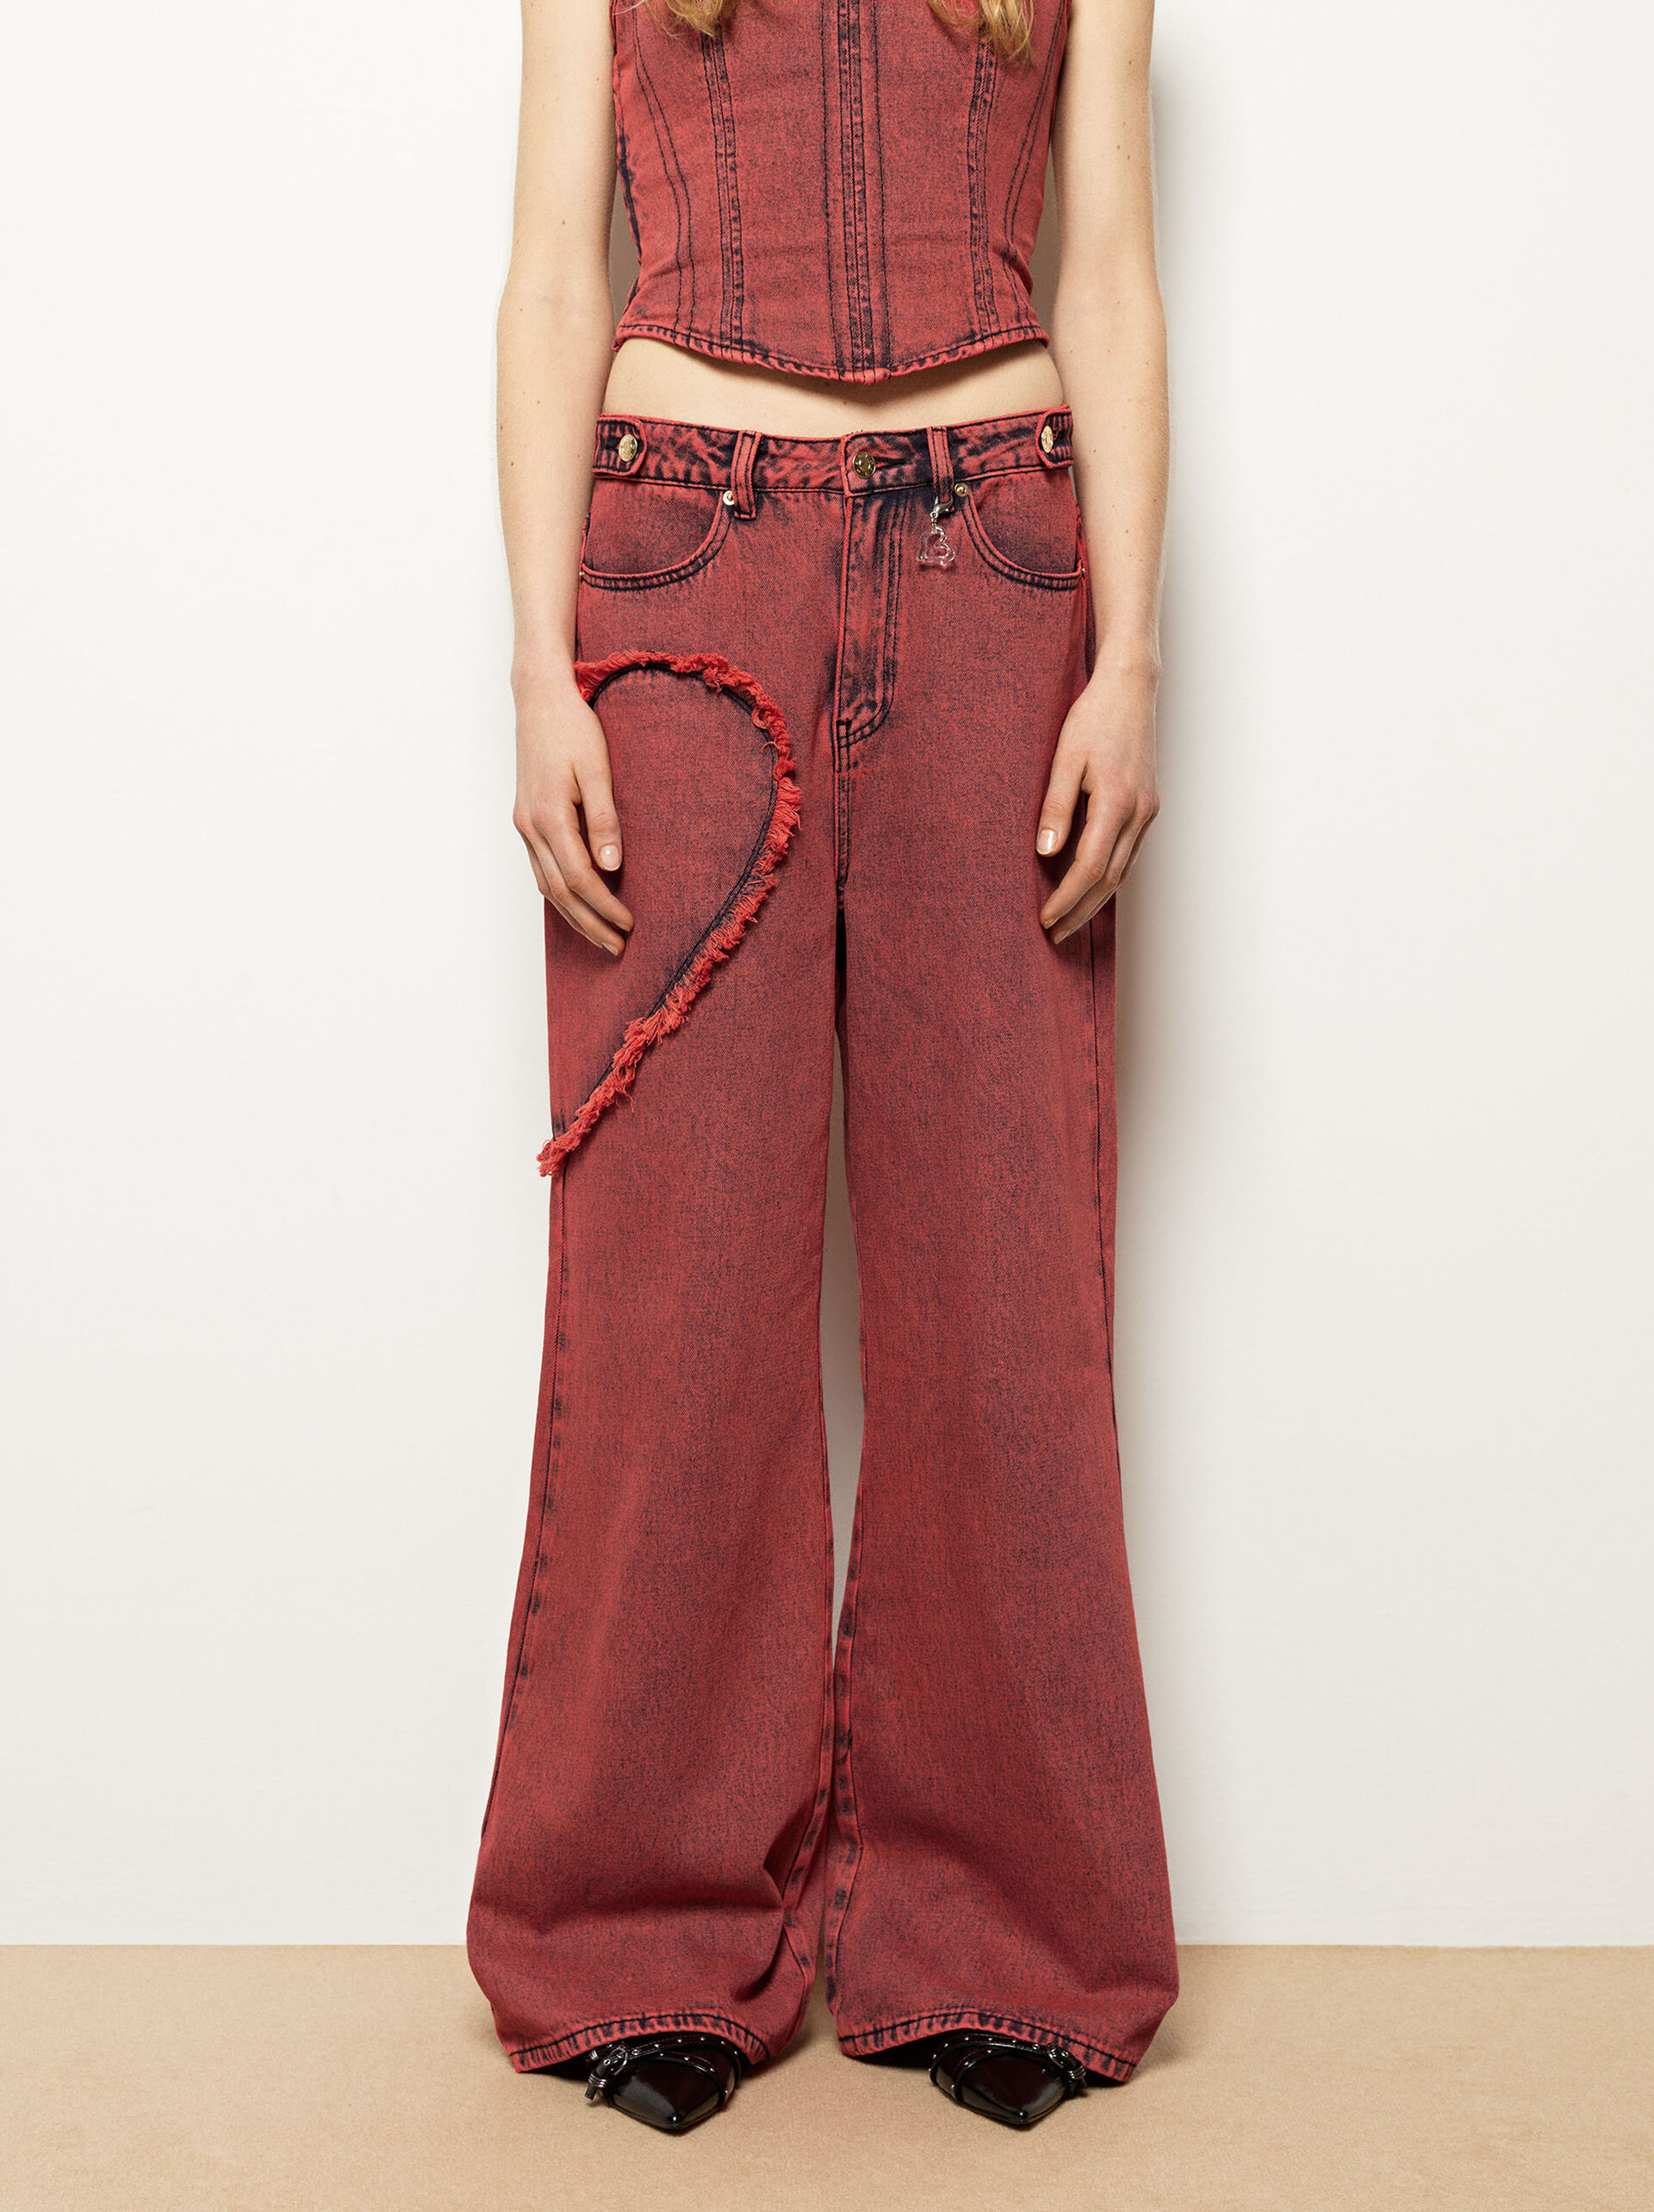 Online Exclusive - Jeans Con Cuore image number 4.0